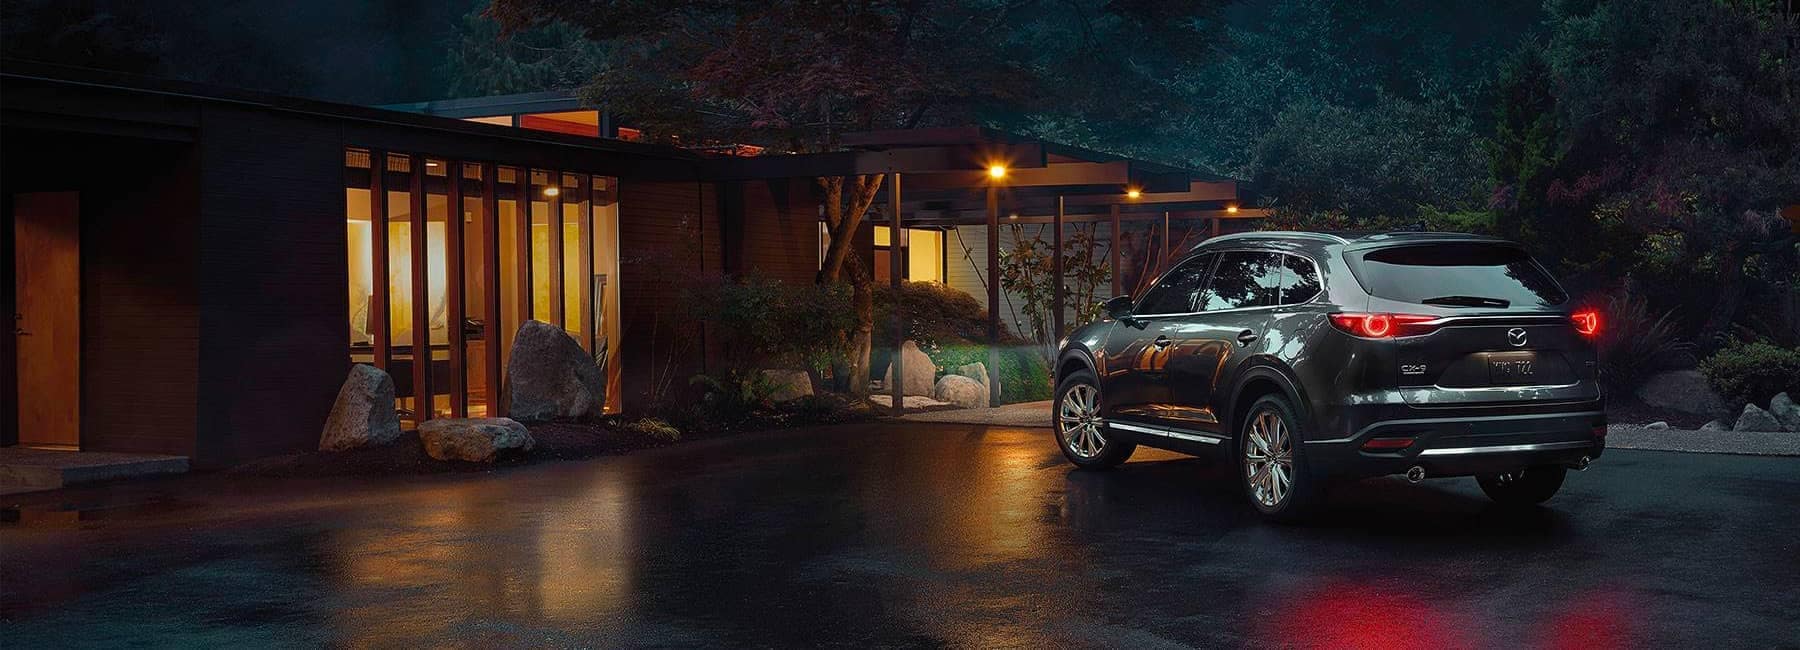 2022-Mazda-CX-9-back-view-exterior-parked-outside-home